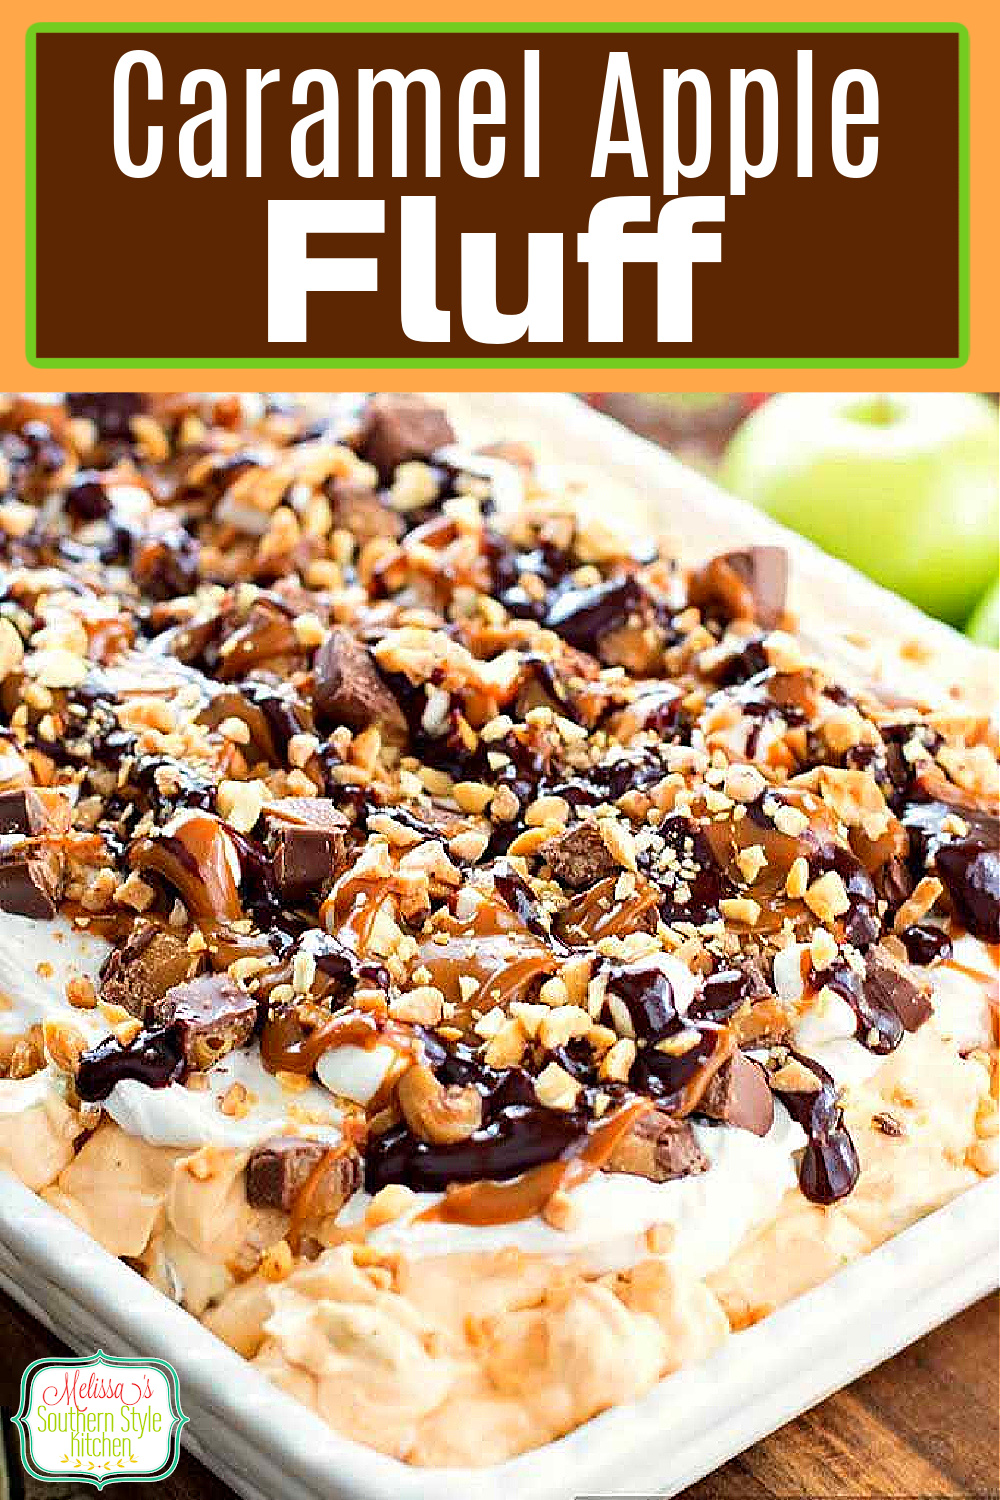 No cooking is required to make this Outrageous Chocolate Drizzled Caramel Apple Fluff #caramelapples #fluff #fluffrecipes #snickersbars #candybar #caramelpudding #apples #bbqdesserts #easyrecipes #southernfood #southernrecipes #chocolate #desserts #dessertfoodrecipes via @melissasssk